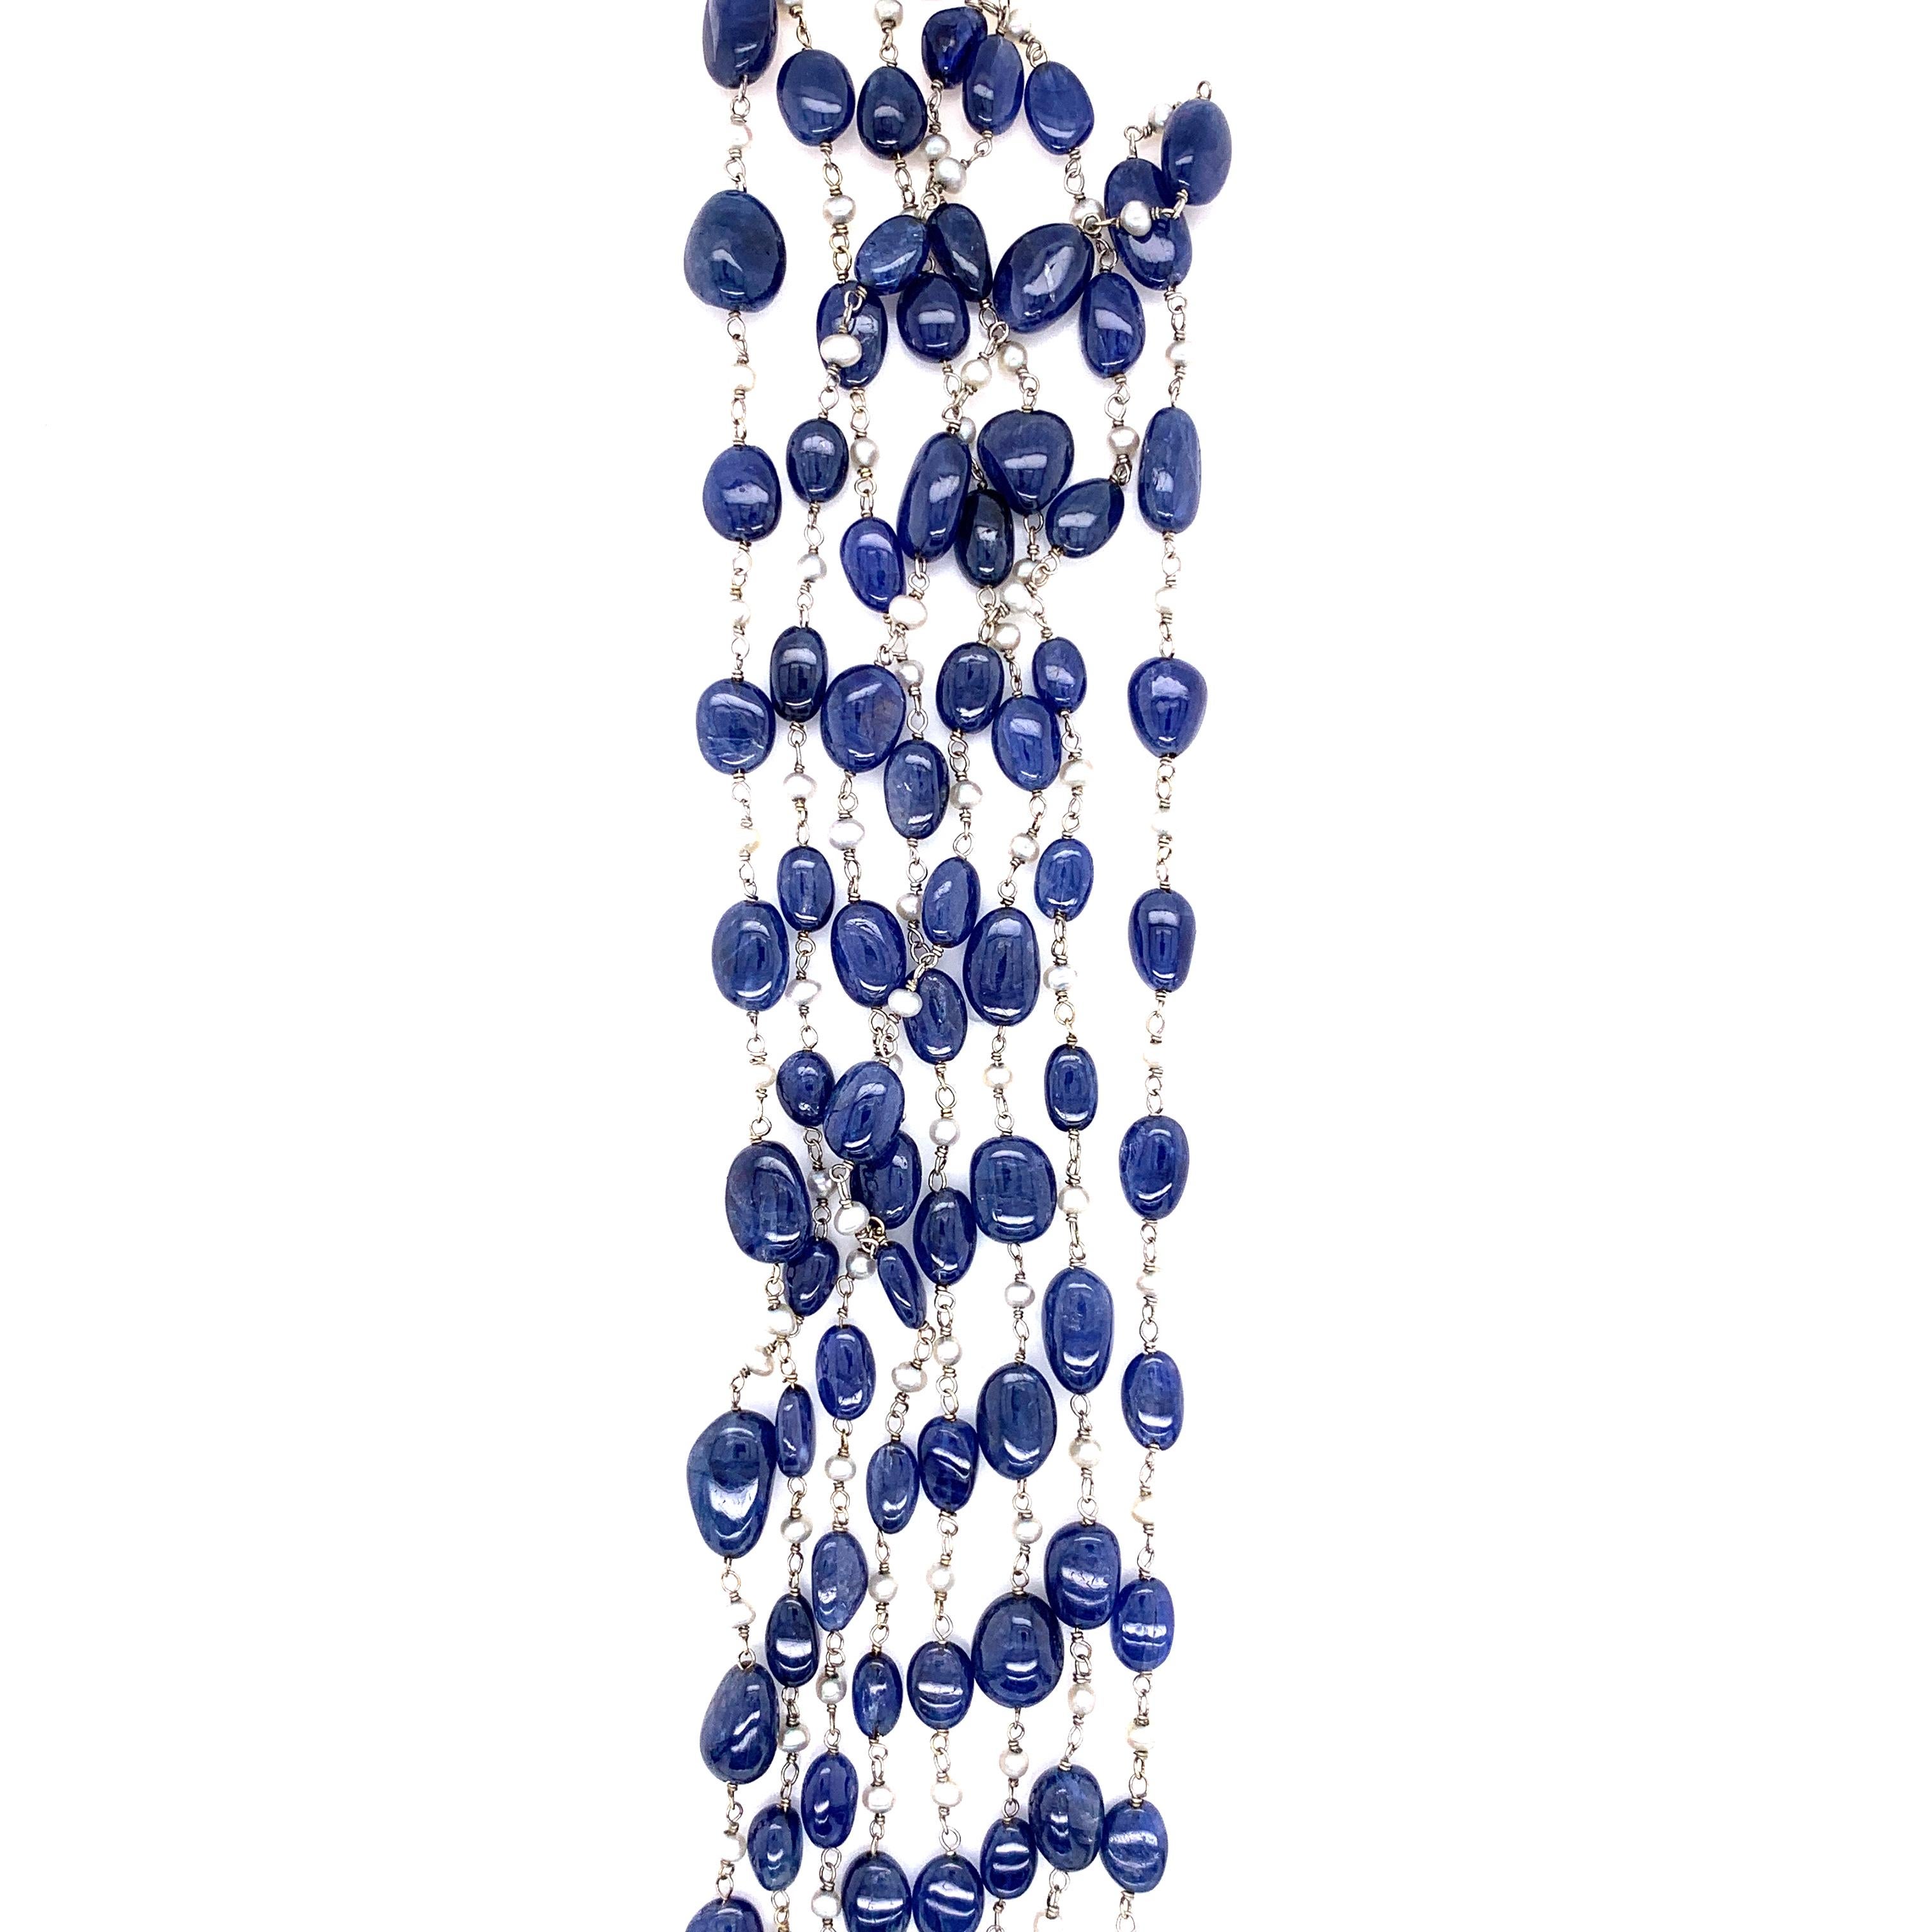 Burmese No Heat Sapphire Beads and Cultured South Sea Pearl 18K Gold Necklace:

A beautiful necklace, it features luscious unheated Burmese blue sapphire beads weighing 147.40 carat, with 9.26 carat of cultured South Sea white pearls interspersed